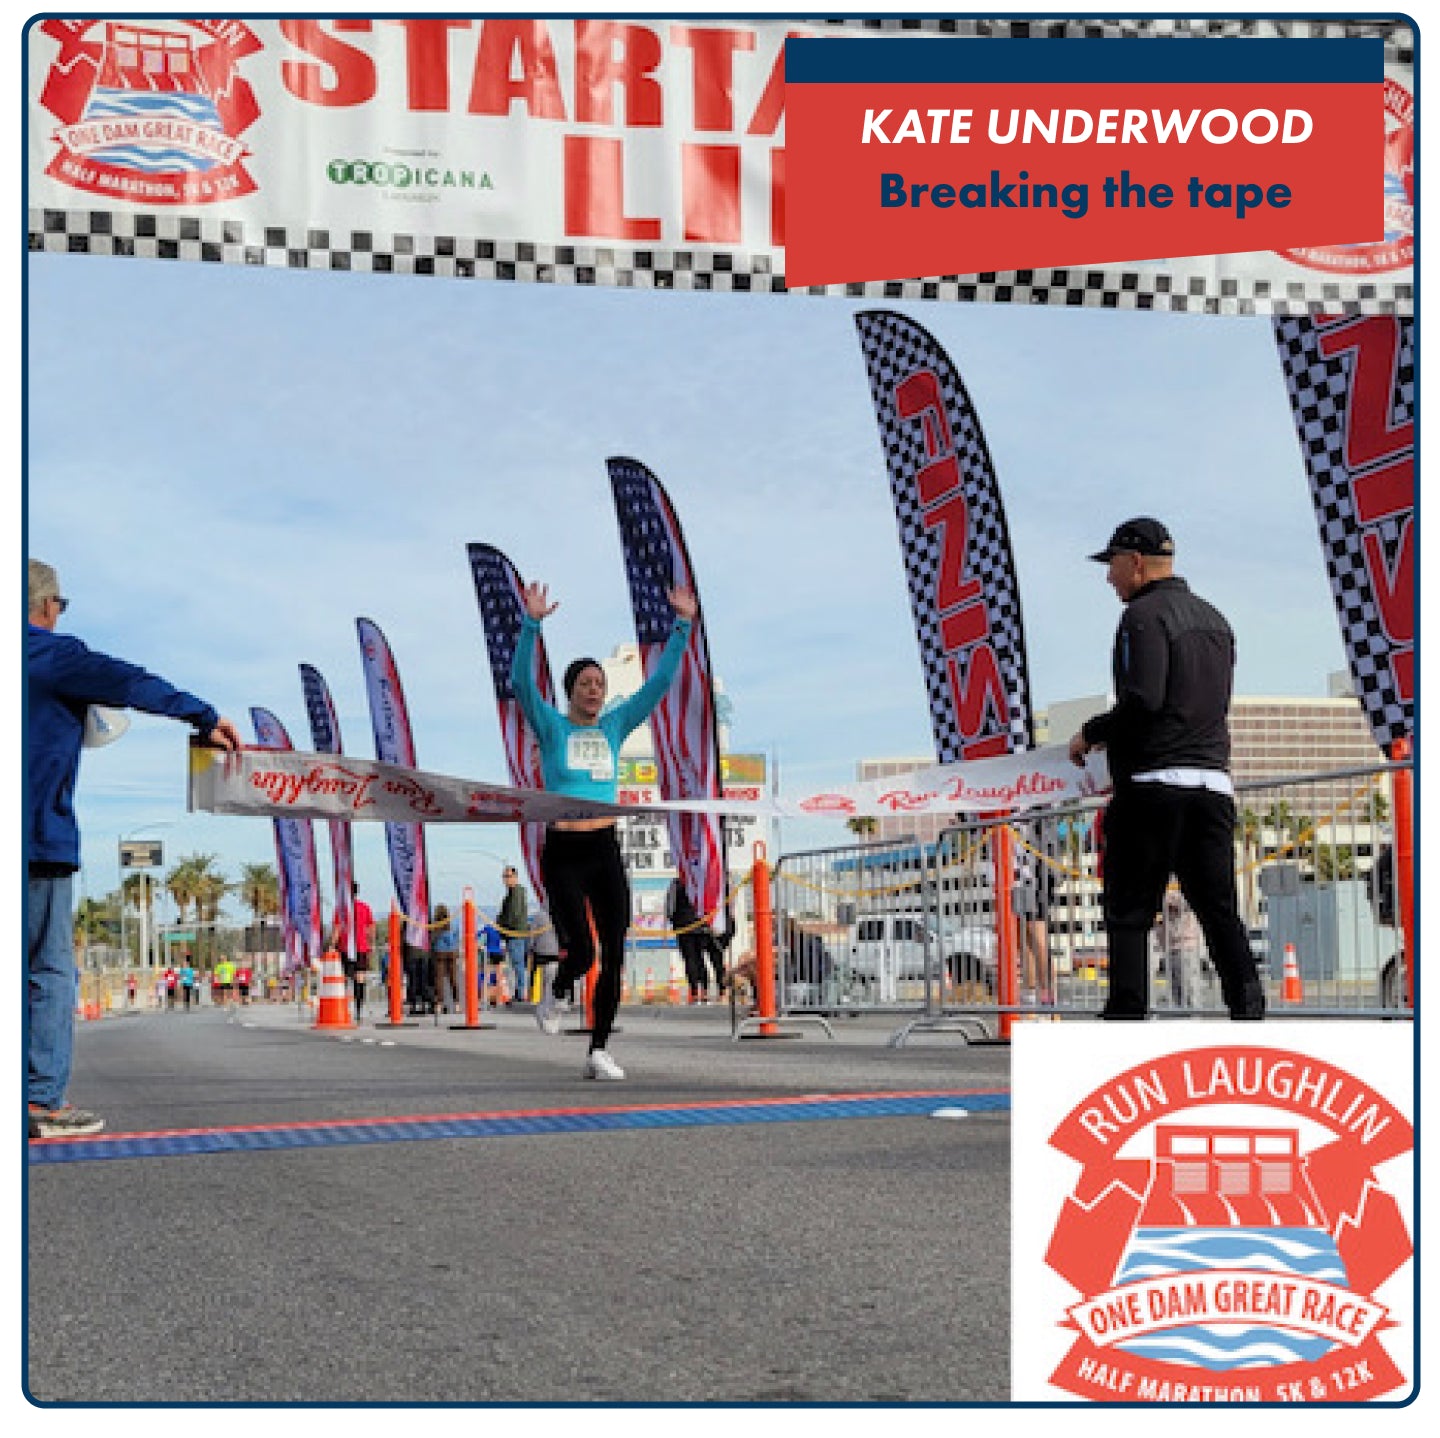 Interview with Runner and Coach Kate Underwood